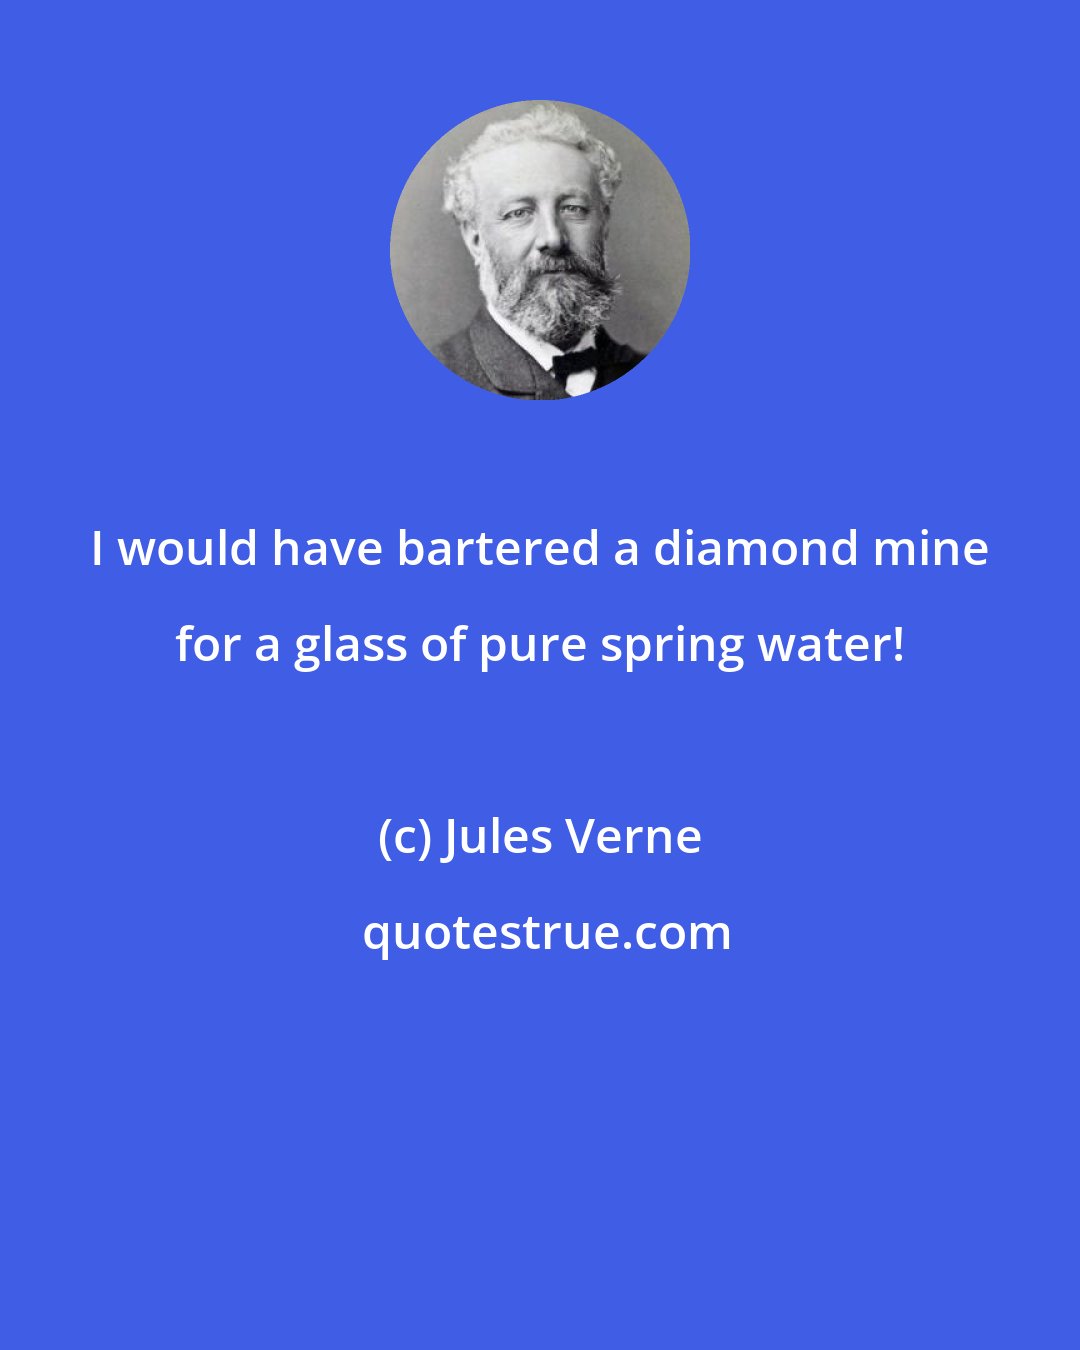 Jules Verne: I would have bartered a diamond mine for a glass of pure spring water!